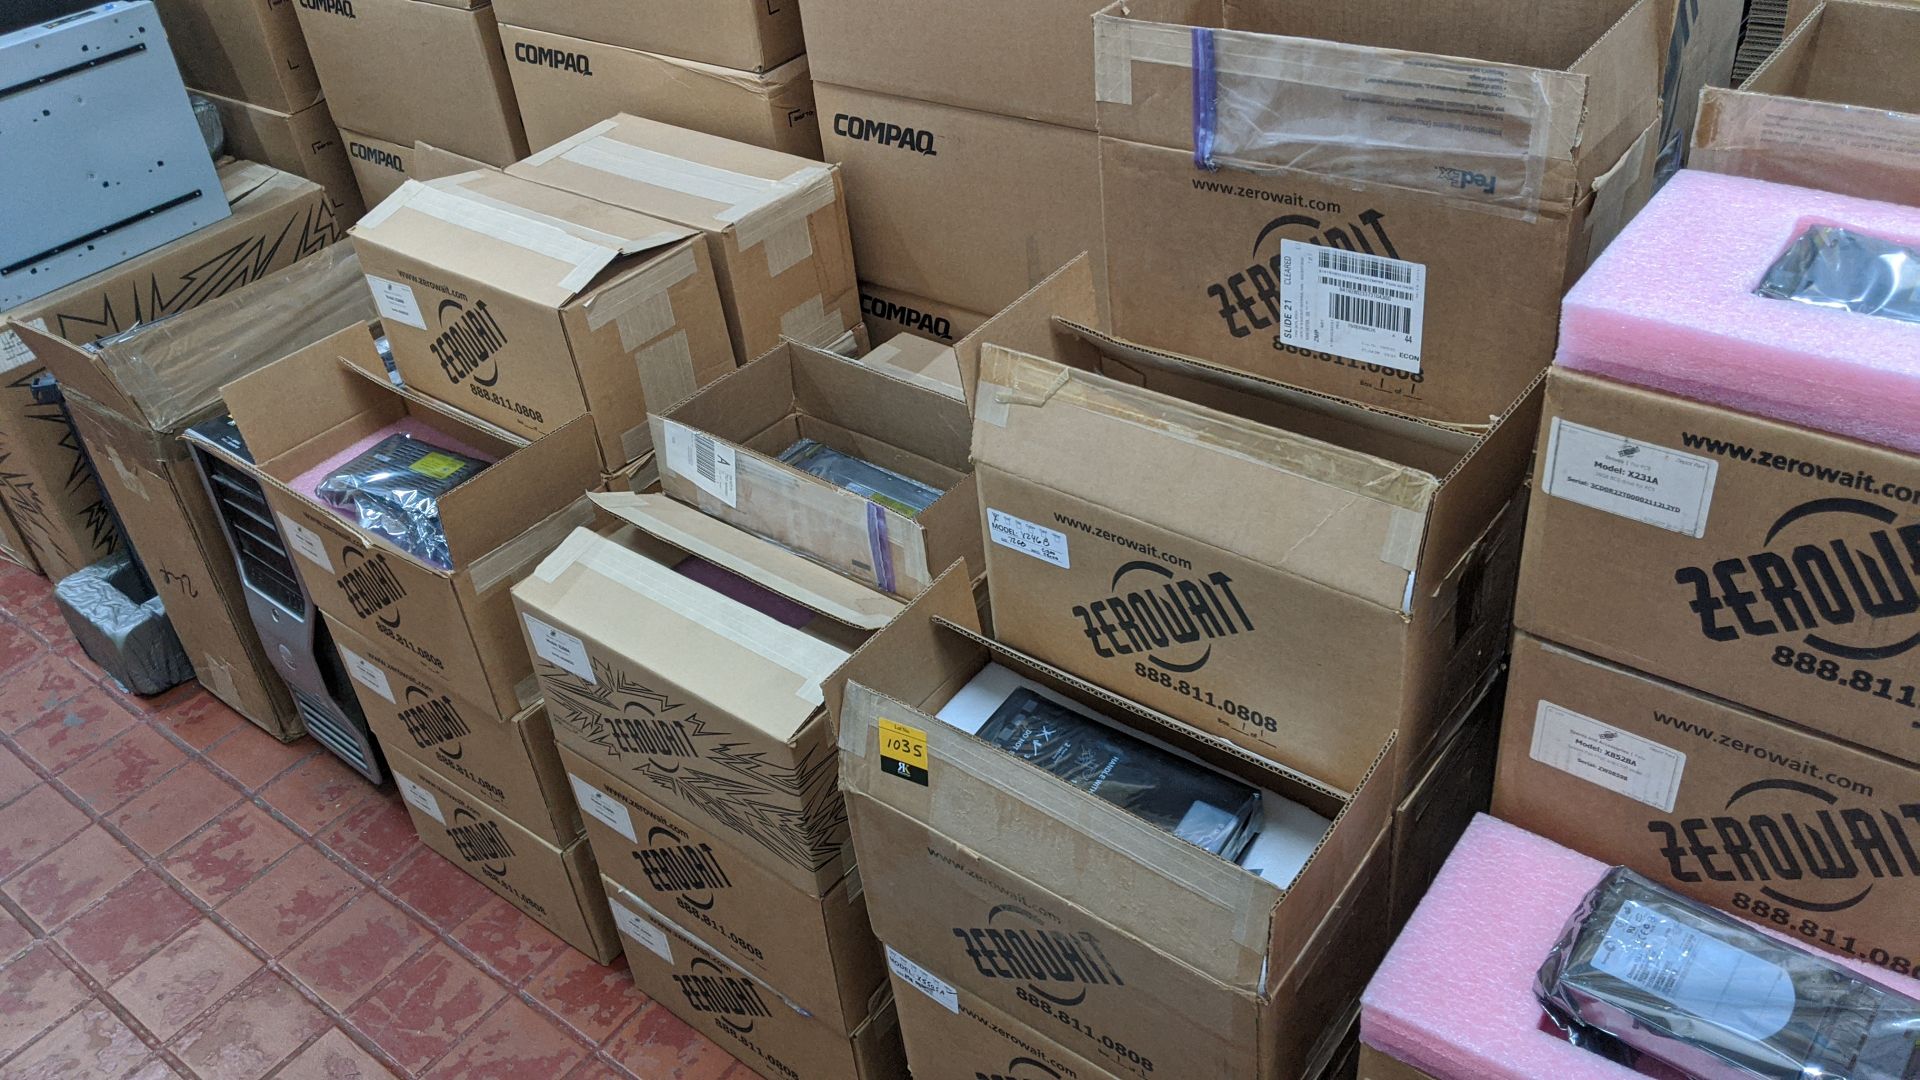 32 boxes mostly containing 1 hard drive per box. This is one of a large number of lots in this